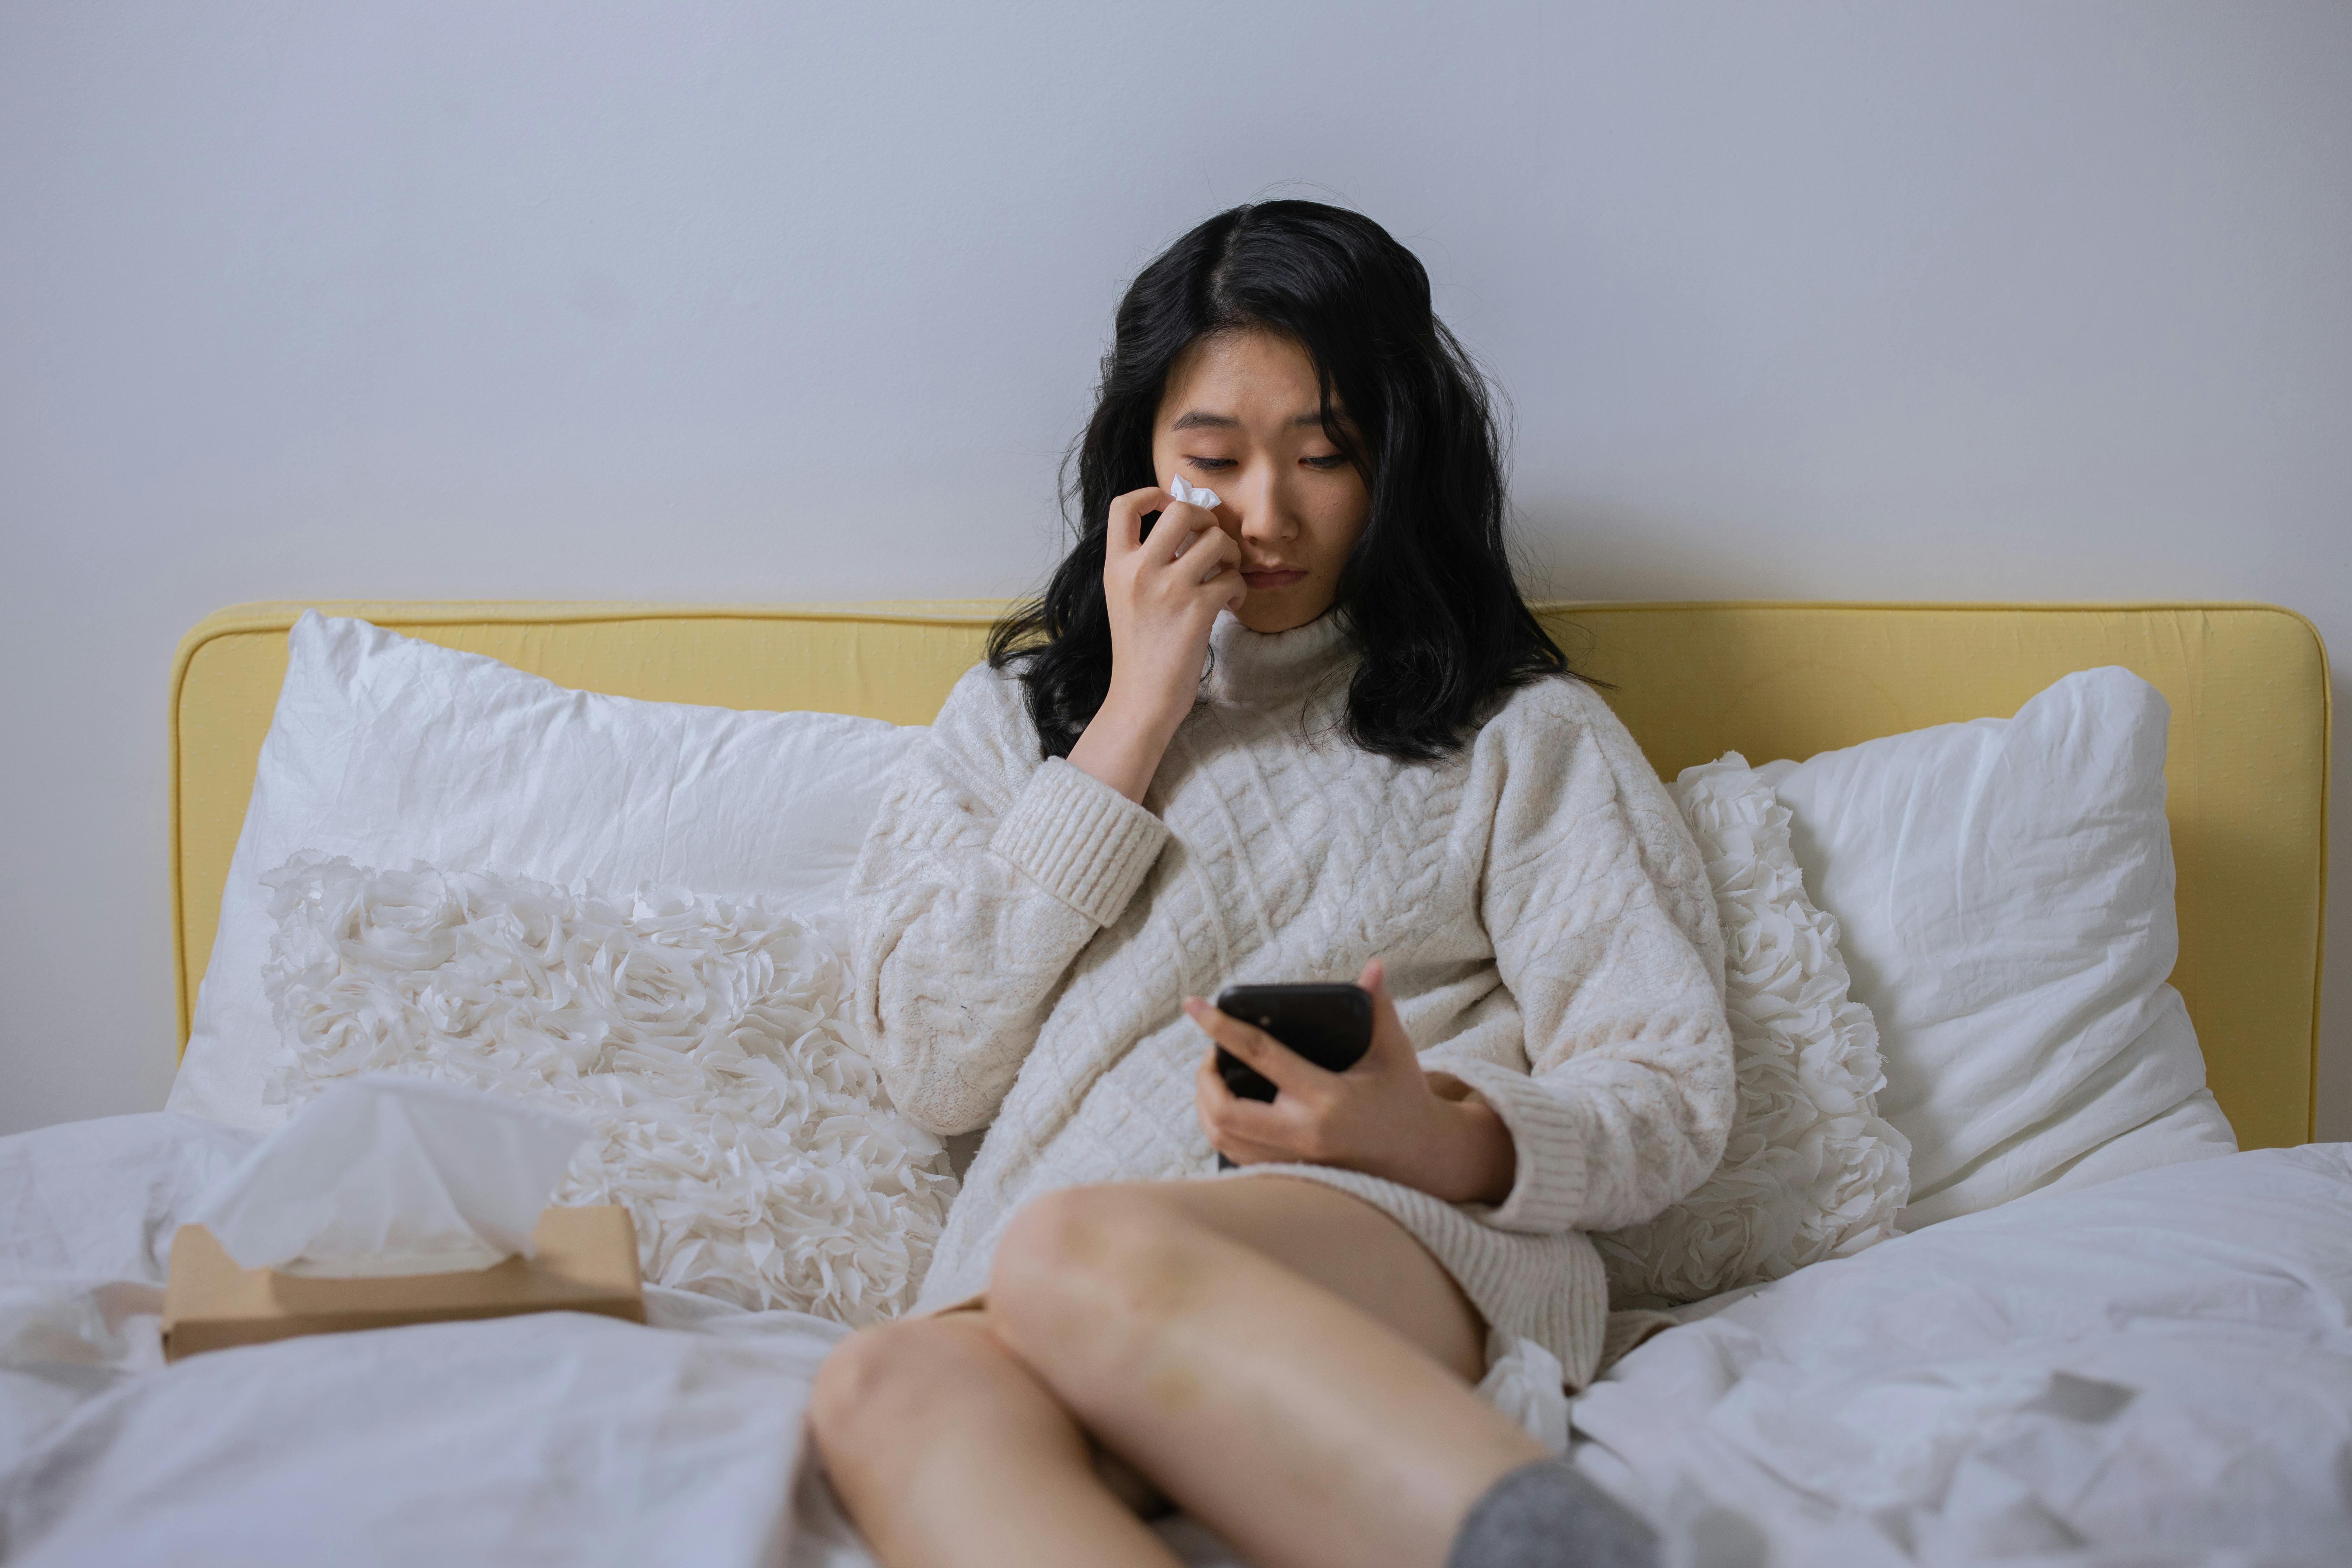 A woman crying and wiping tears while holding a phone in bed | Source: Pexels